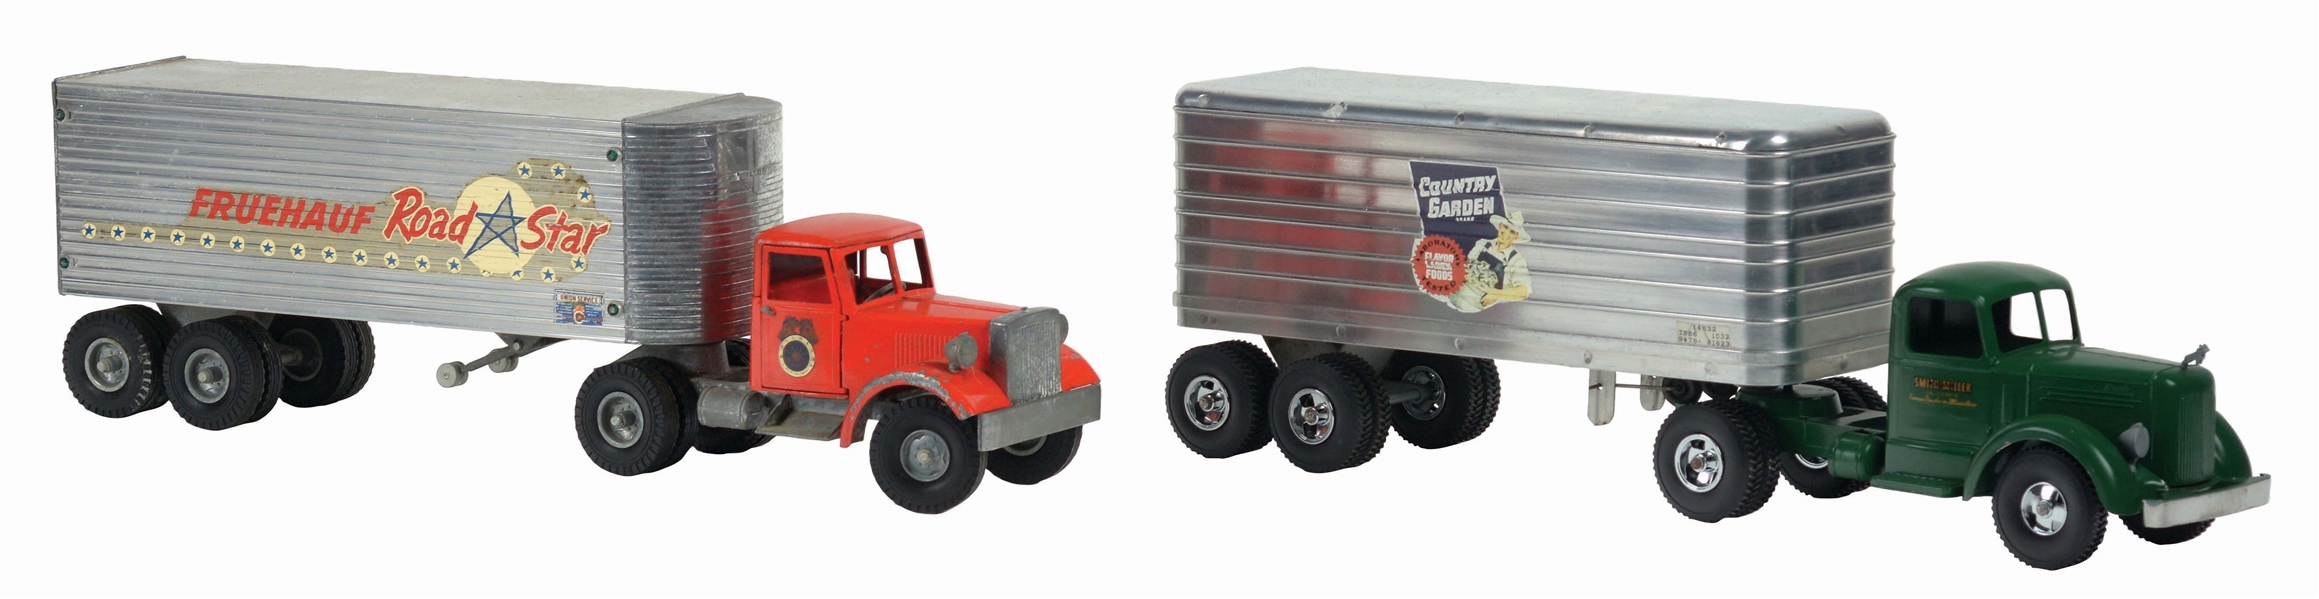 LOT OF 2 SMITH-MILLER COUNTRY GARDEN AND ROAD STAR TRUCKS.